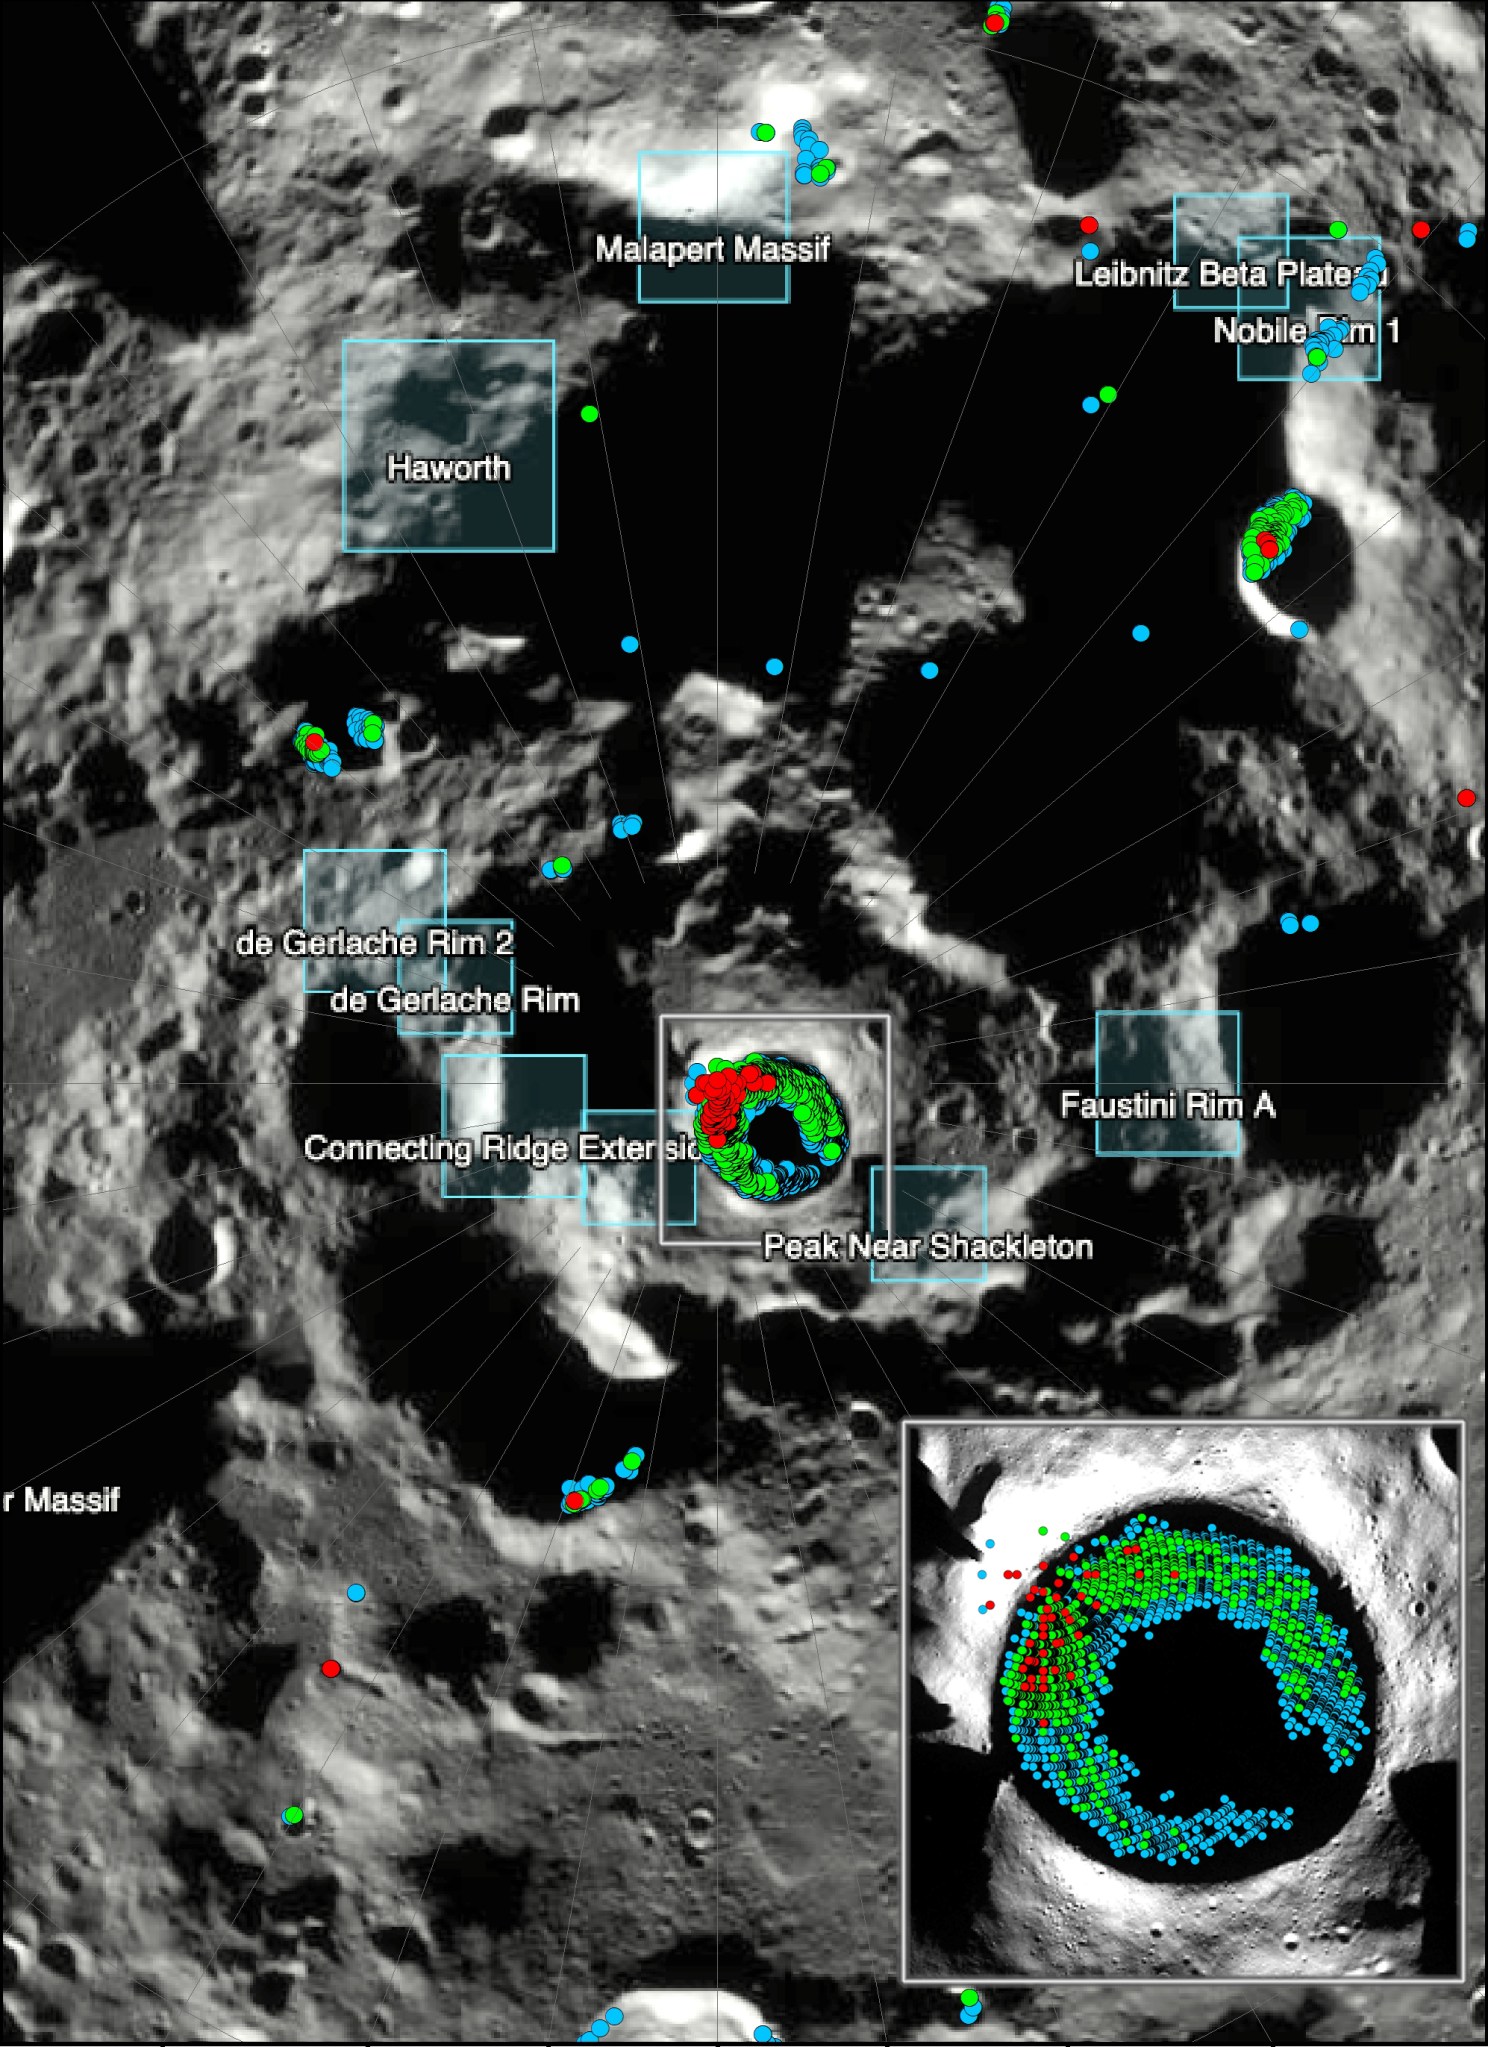 Map showing areas with landslide potential at lunar south pole.